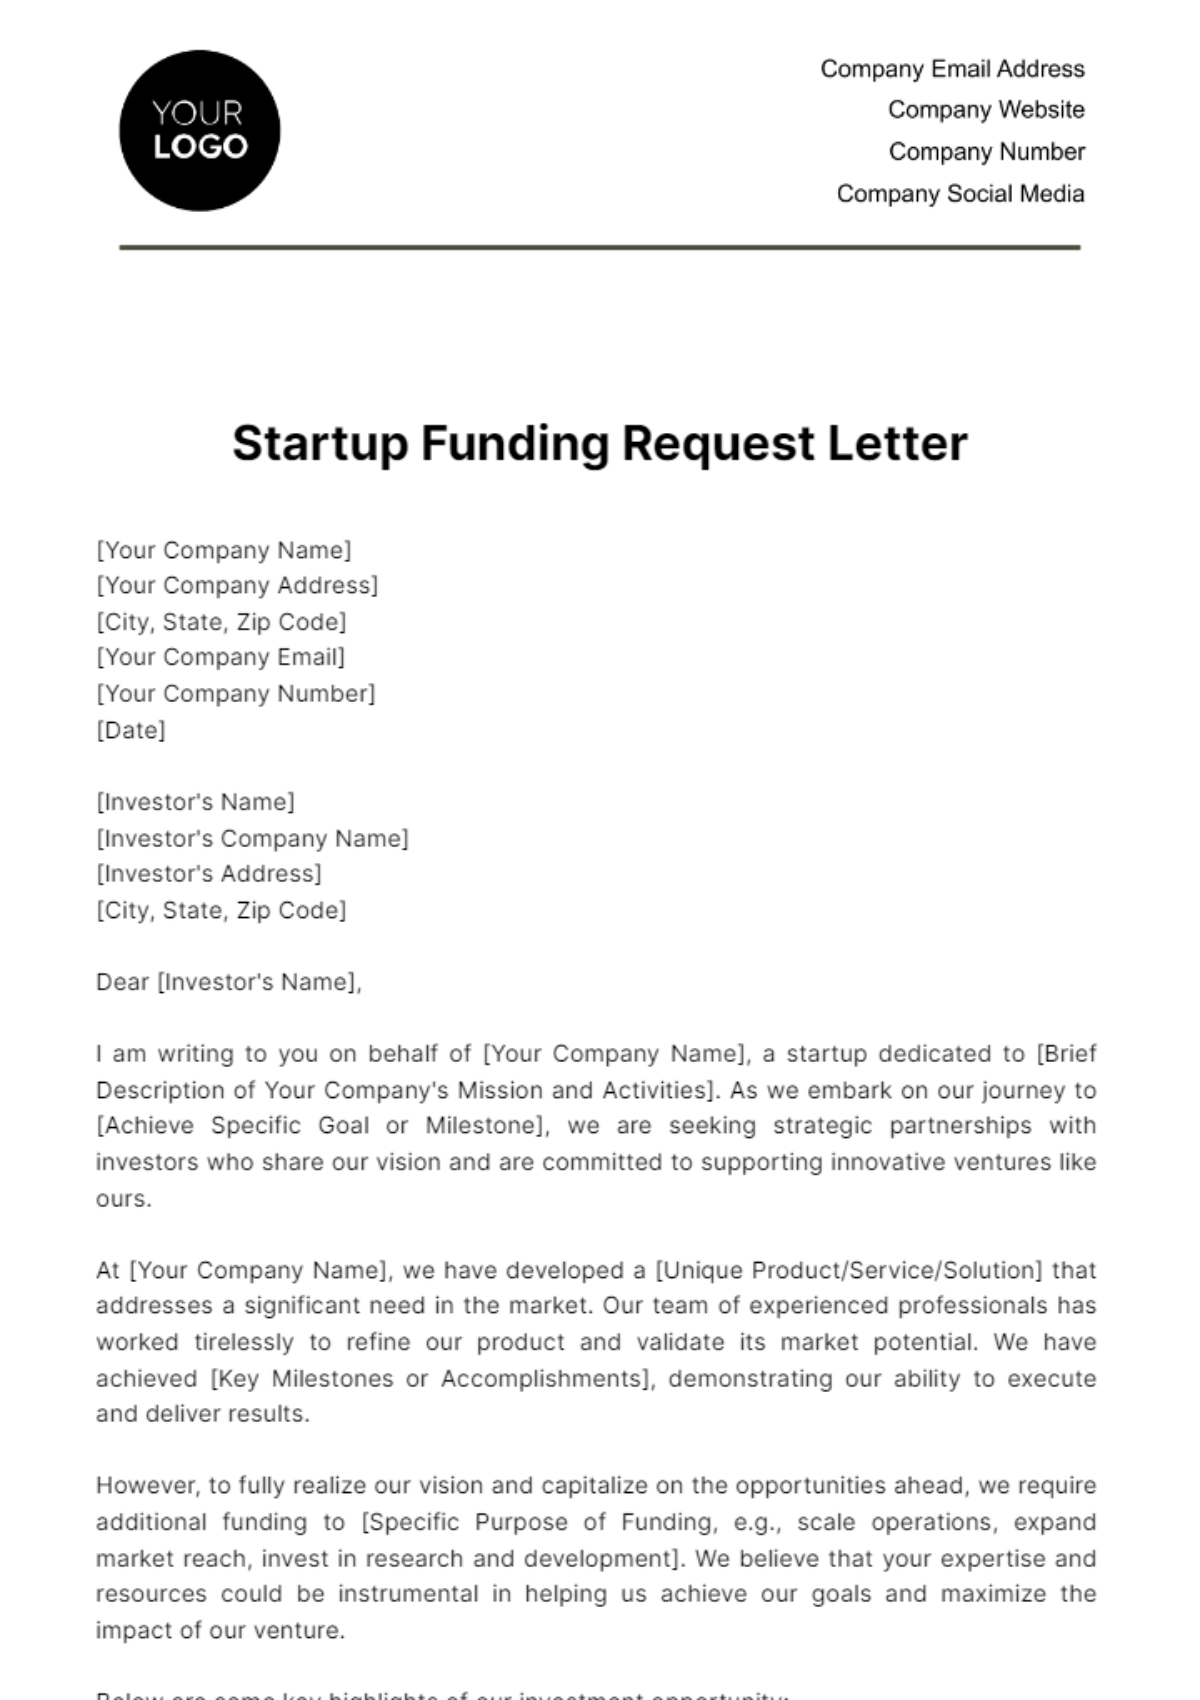 Free Startup Funding Request Letter Template